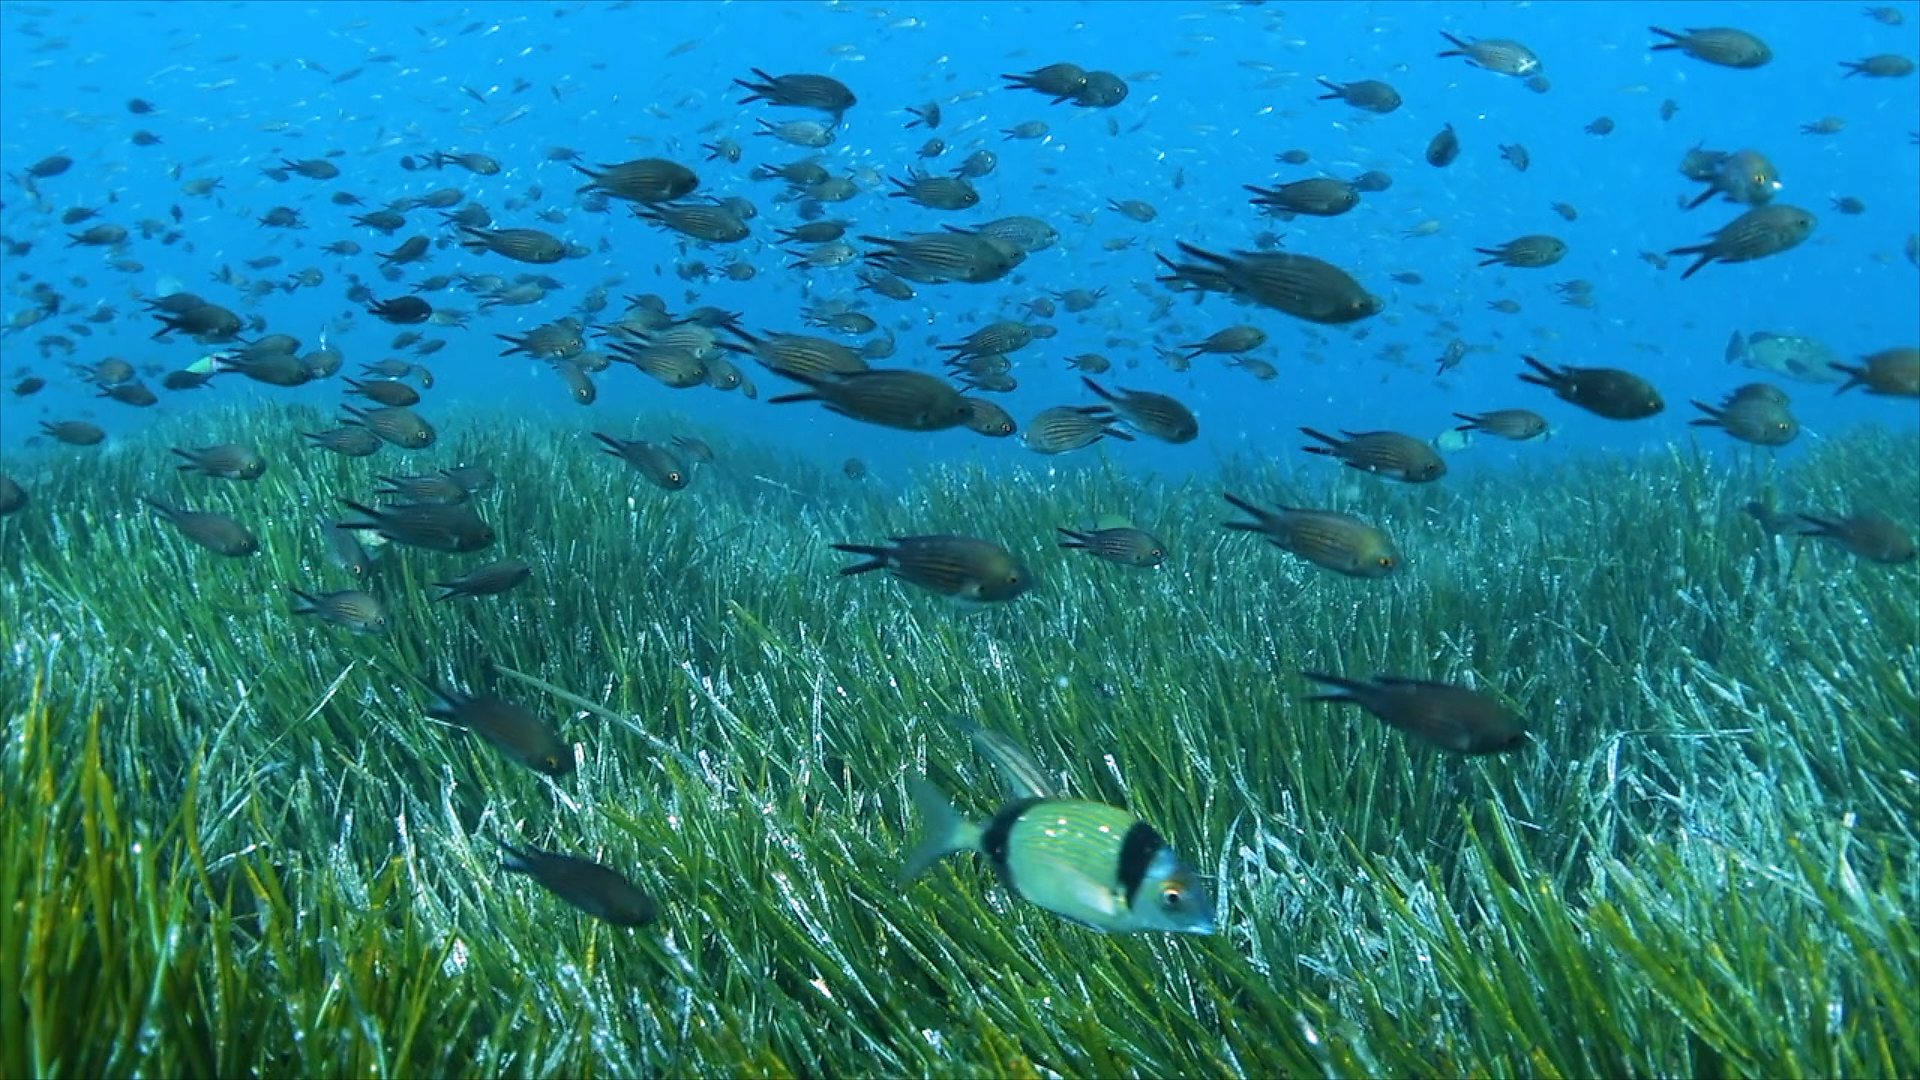 The Posidonia is responsible for much of the Mediterranean's clear water and sandy beaches